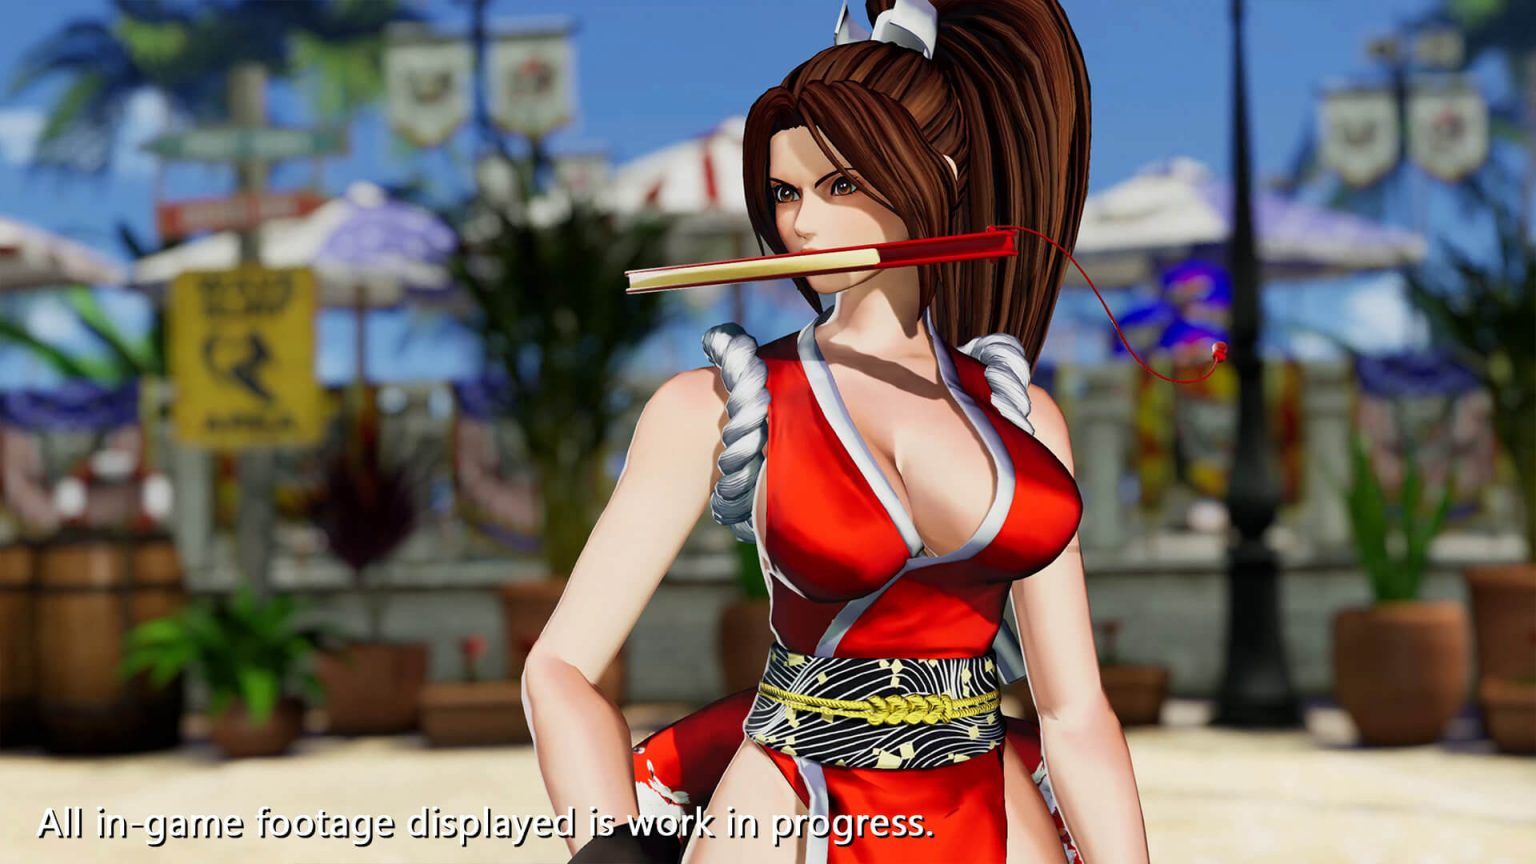 King of Fighters XV screenshots